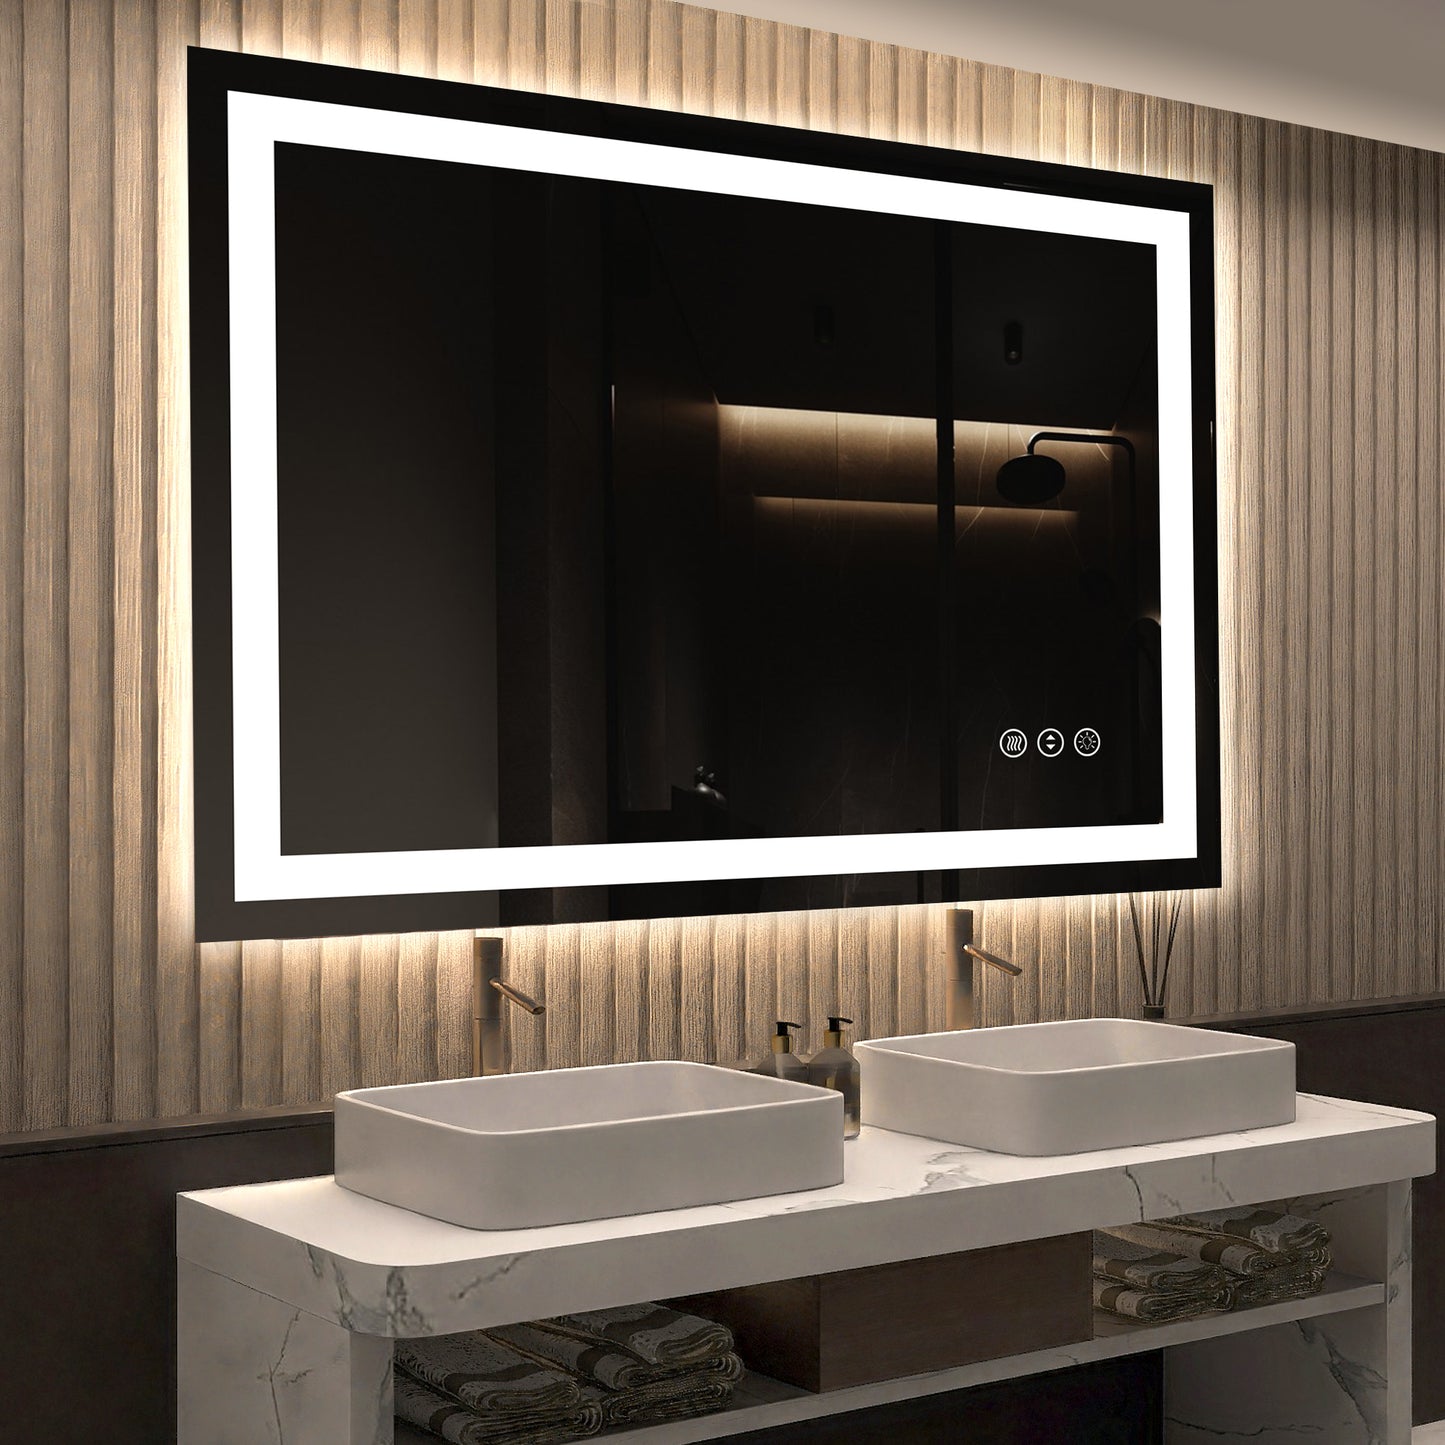 SBAGNO 24x36 Inches Led Bathroom Mirror Made of Tempered Glass